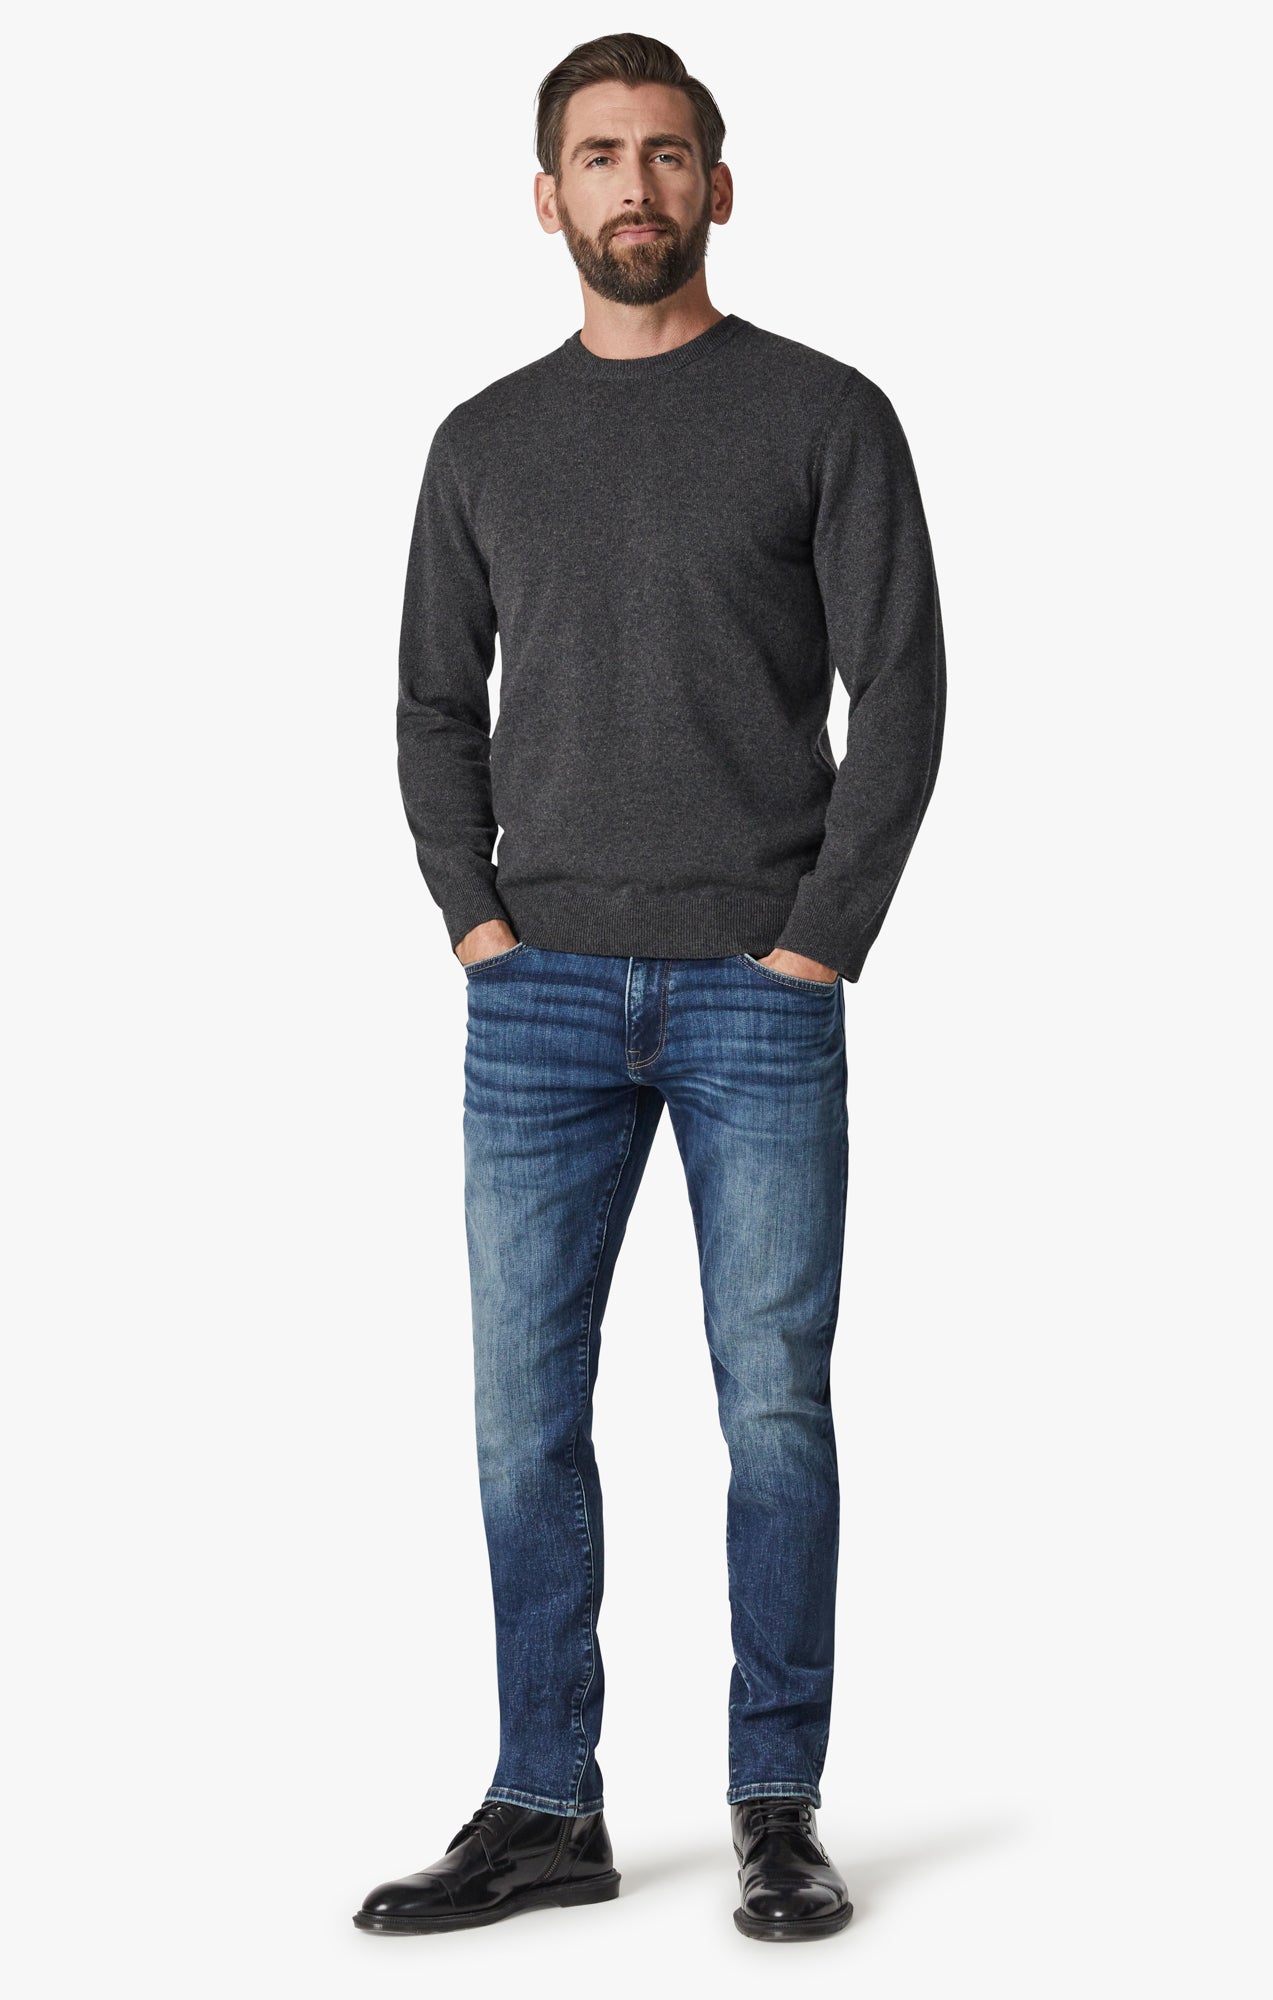 Cashmere Crew Neck Sweater In Charcoal Image 4